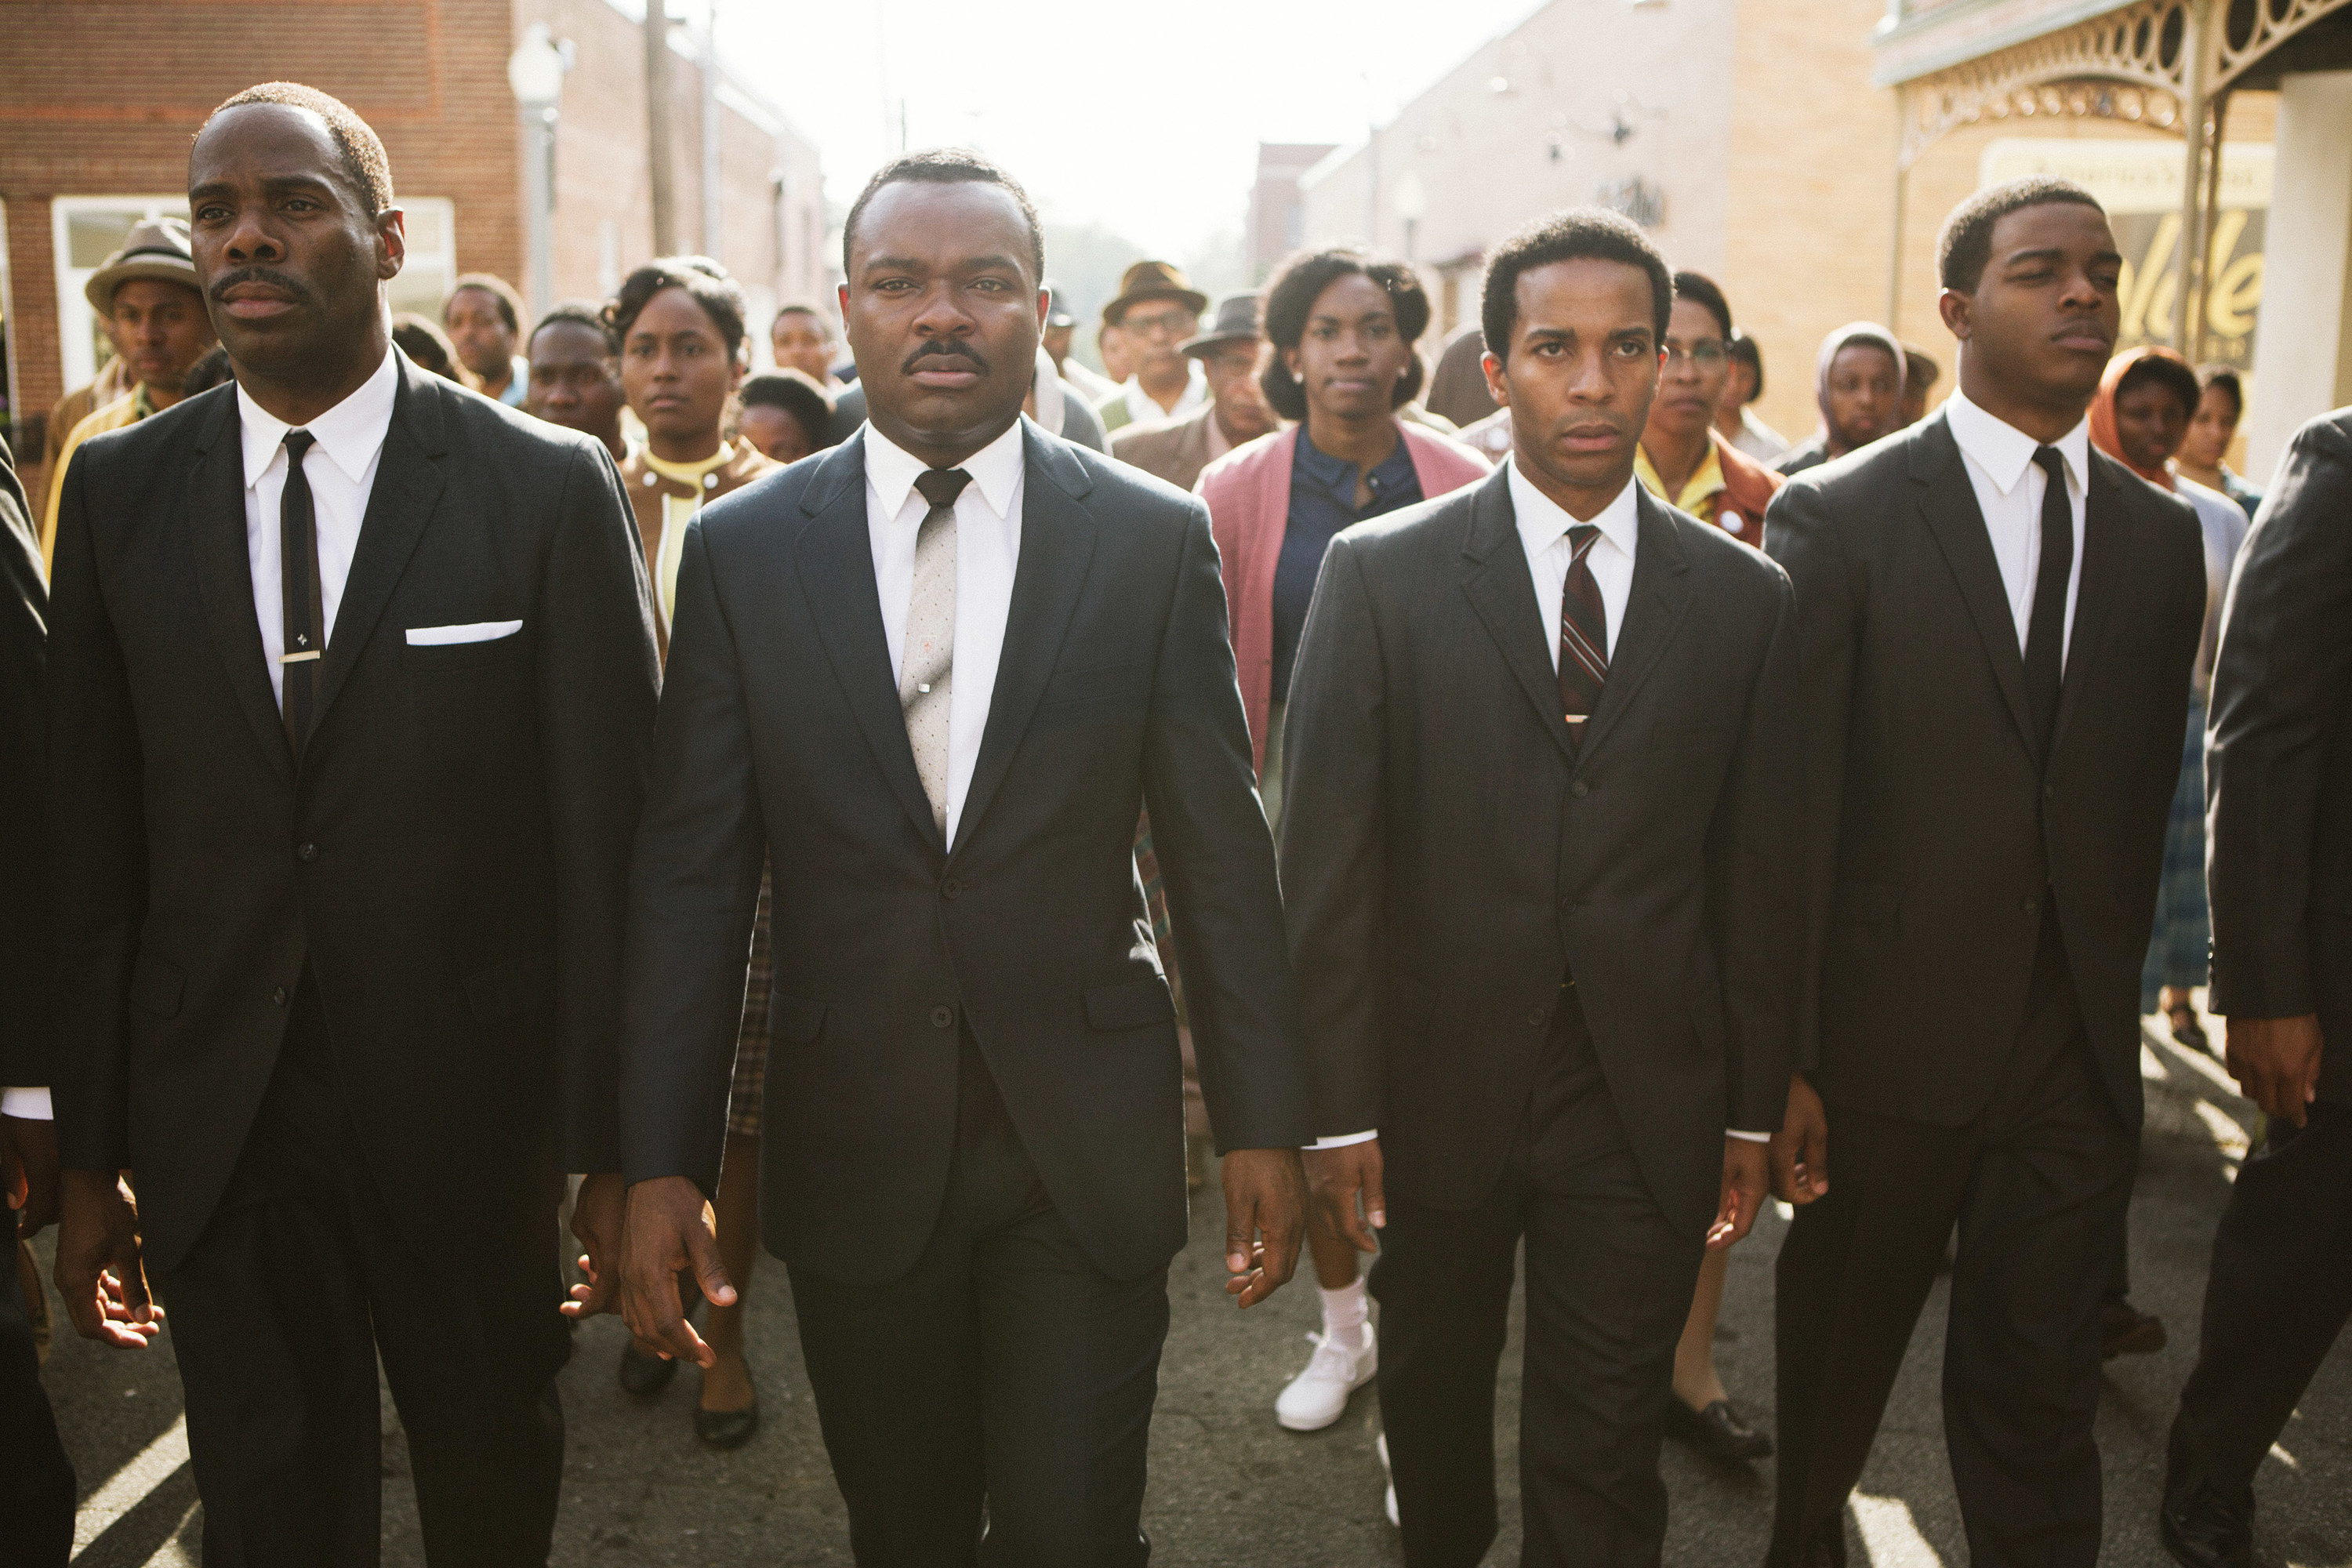 Colman Domingo as Ralph Abernathy, David Oyelowo, Andre Holland as Andrew Young, and Stephan James walk abreast